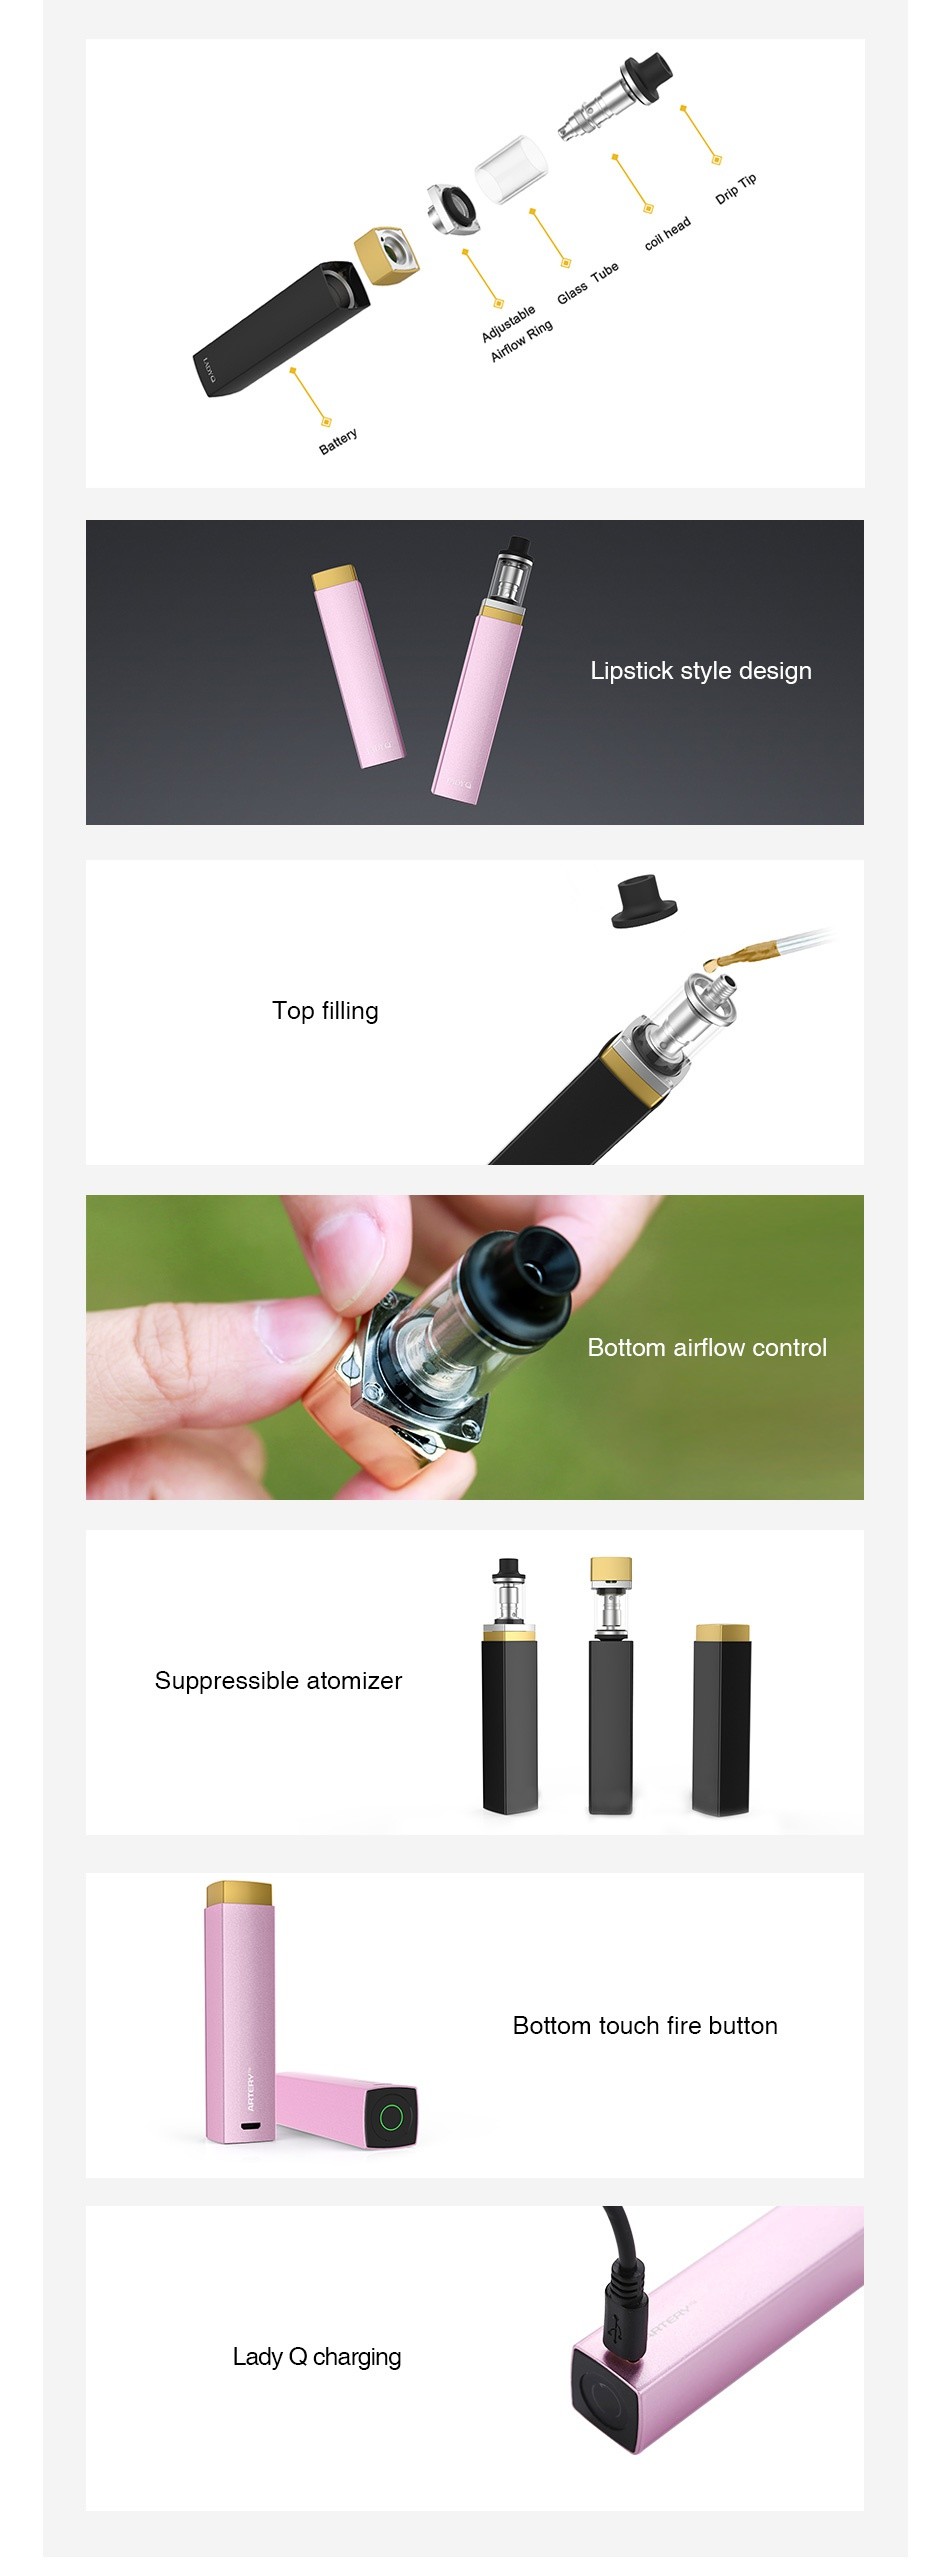 Artery Lady Q Starter Kit 1000mAh Lipstick style design p Tilling ottom airflow control Suppressible atomizer Bottom touch fire button adly Q charging